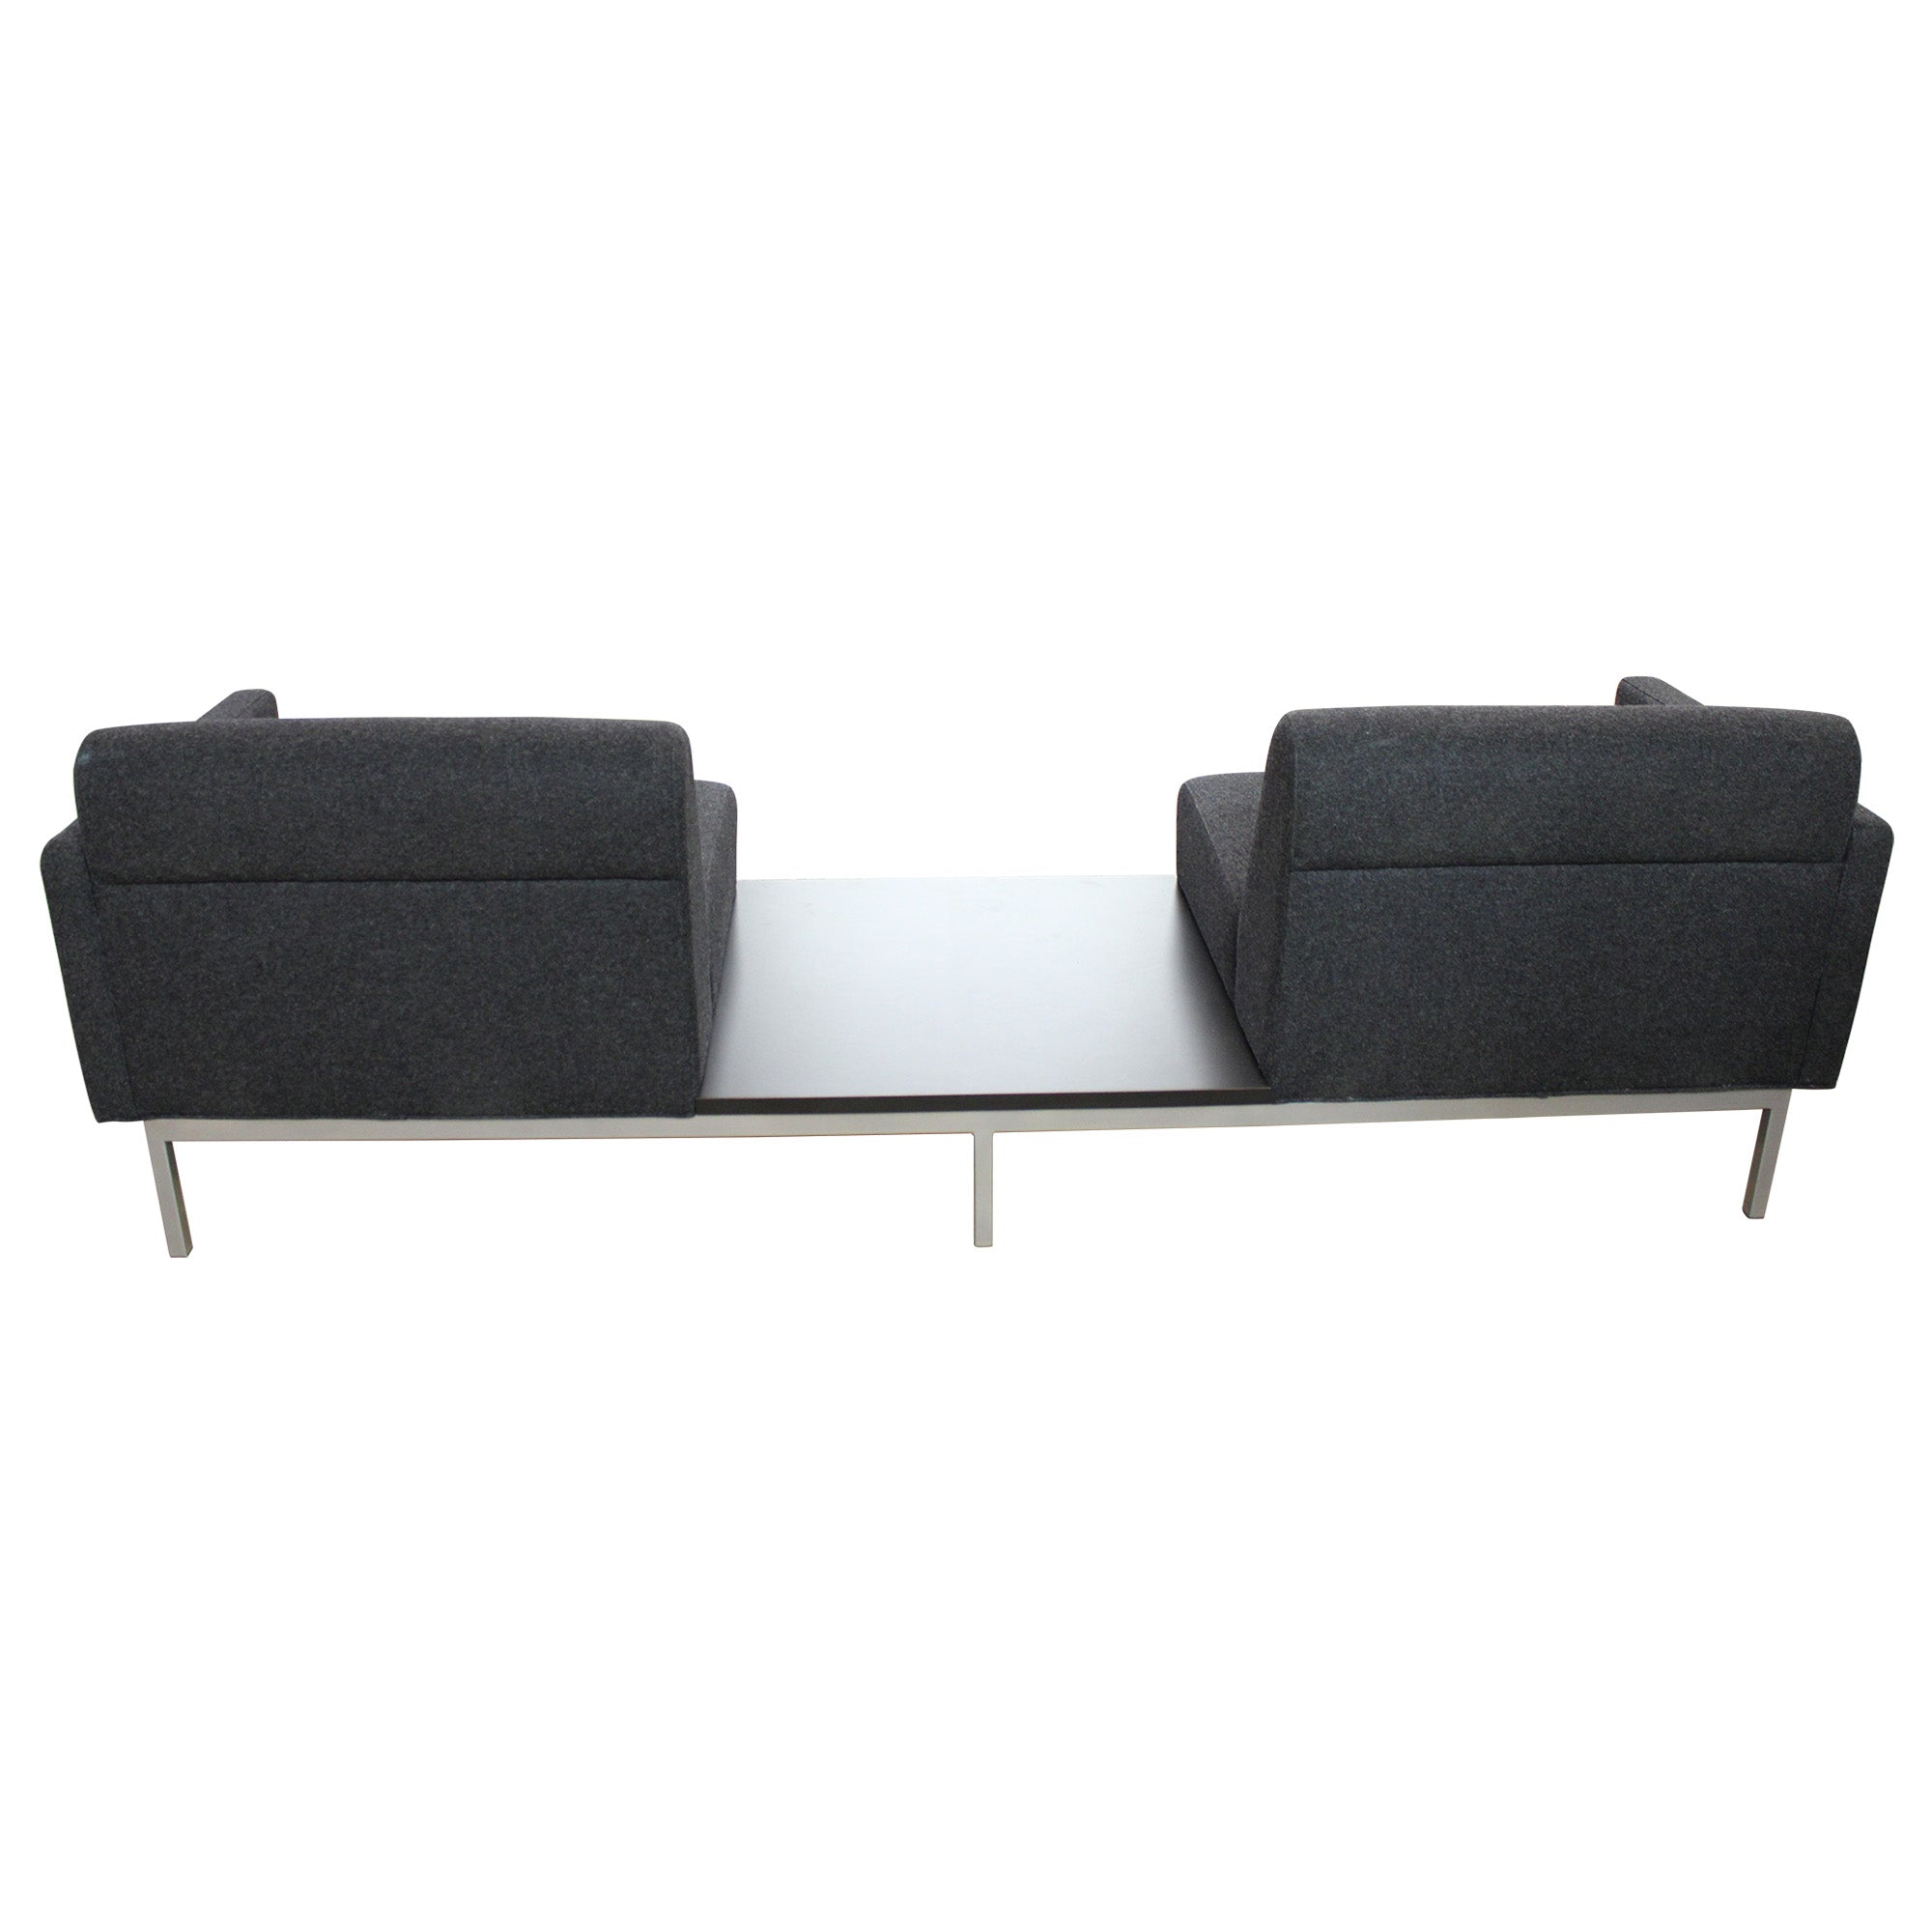 Todd 2 Seat Sofa by Cartwright - Preowned